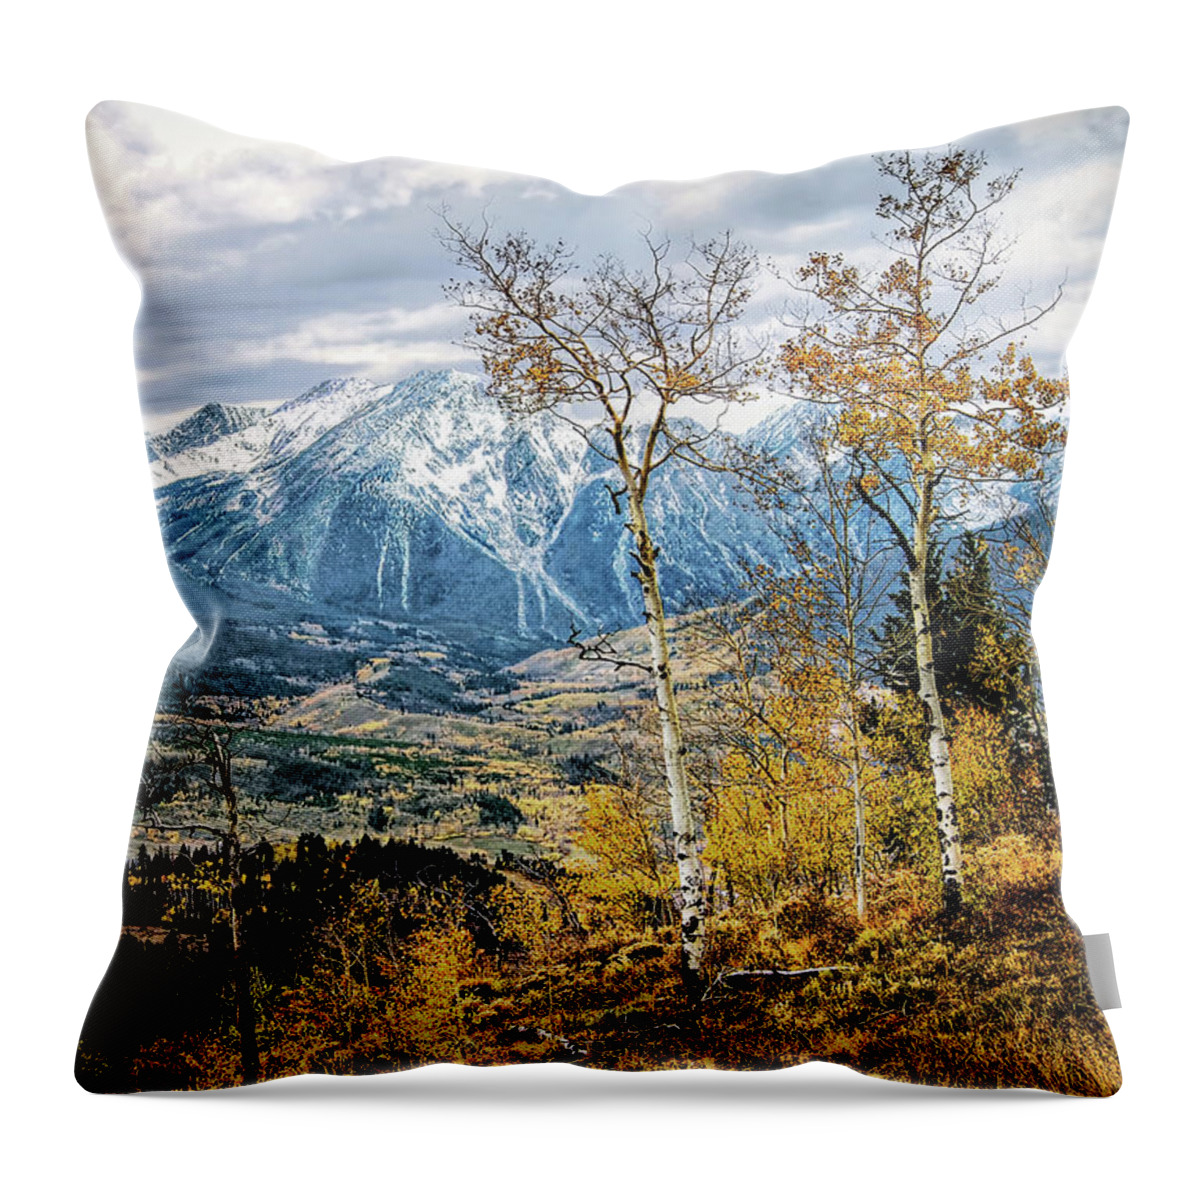 Autumn Throw Pillow featuring the photograph Colorado Autumn by Jim Hill